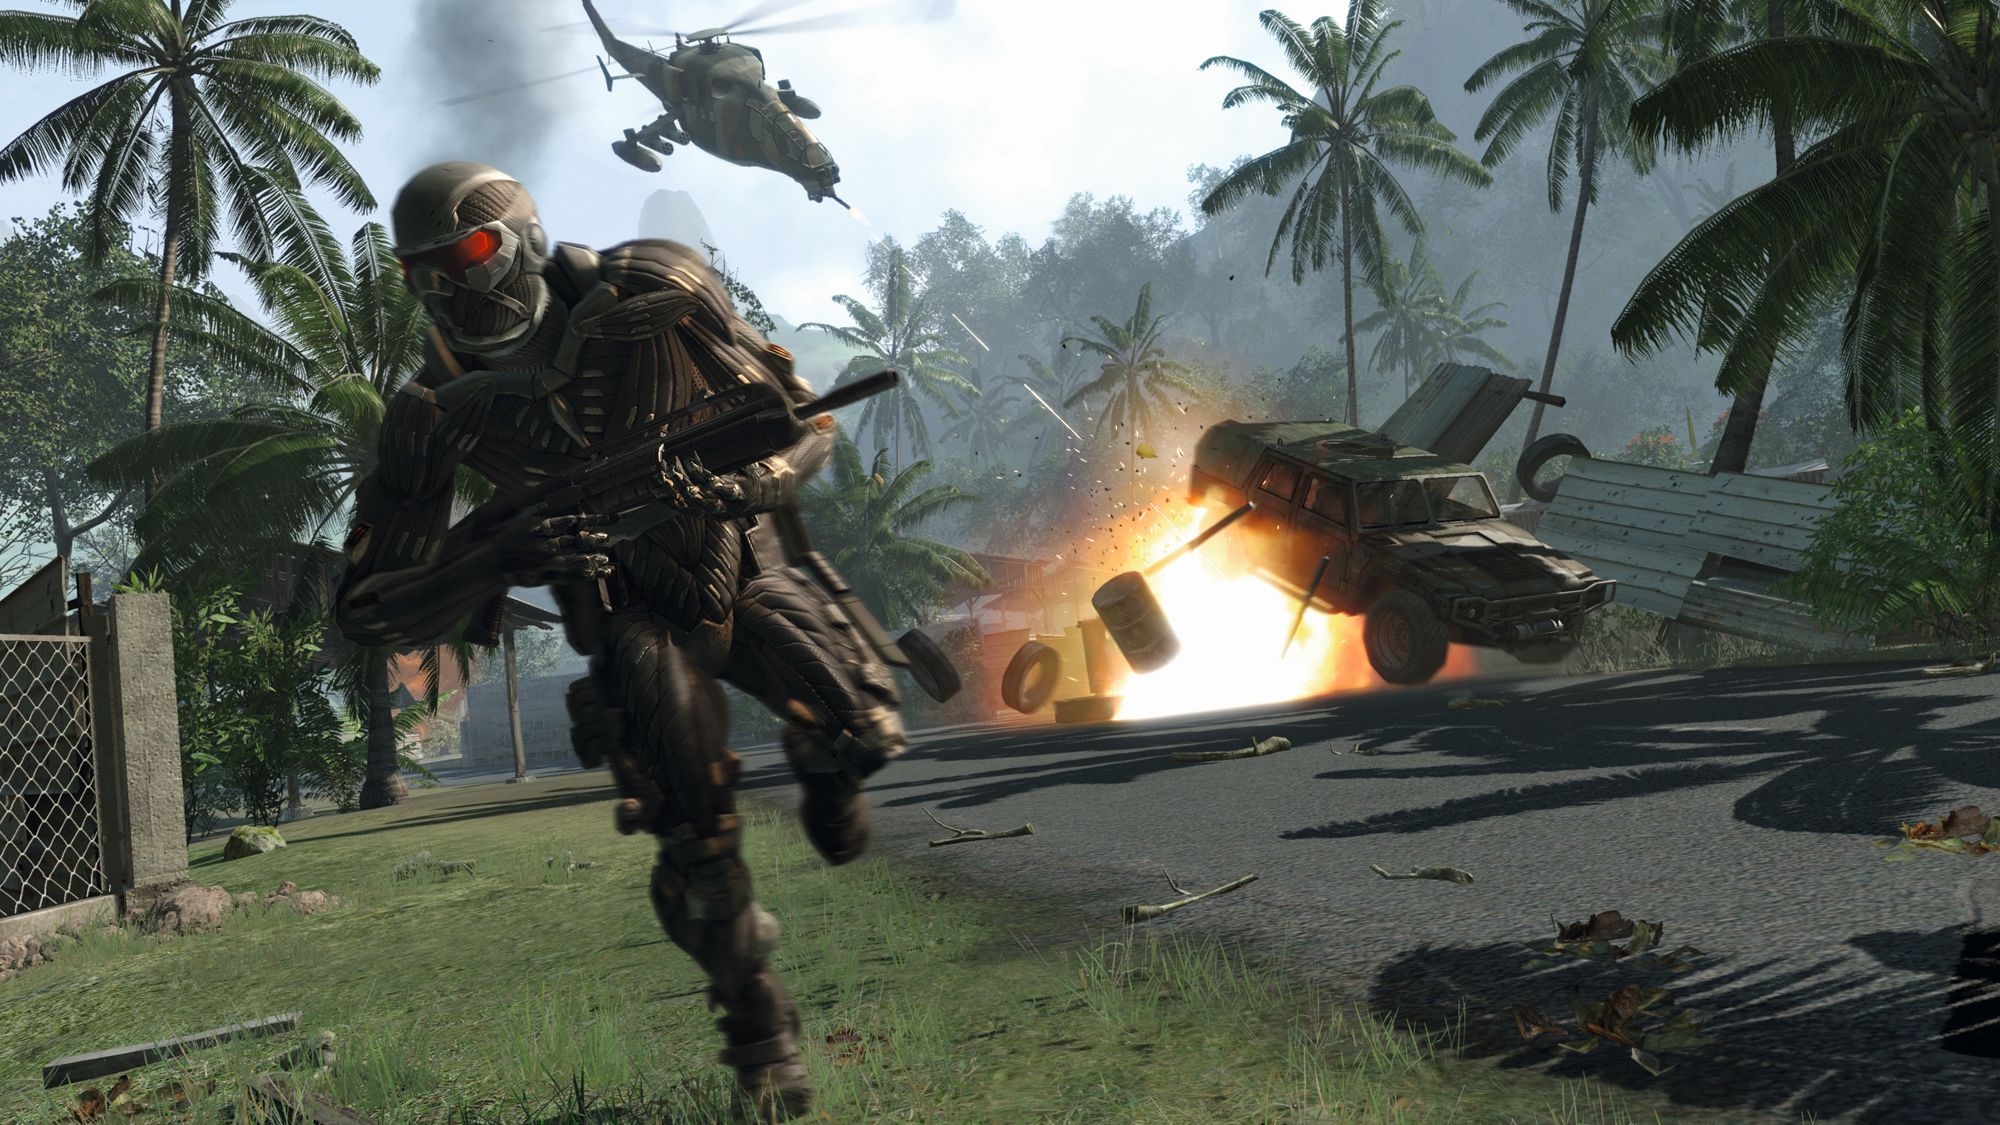 Crysis PC Game Overview